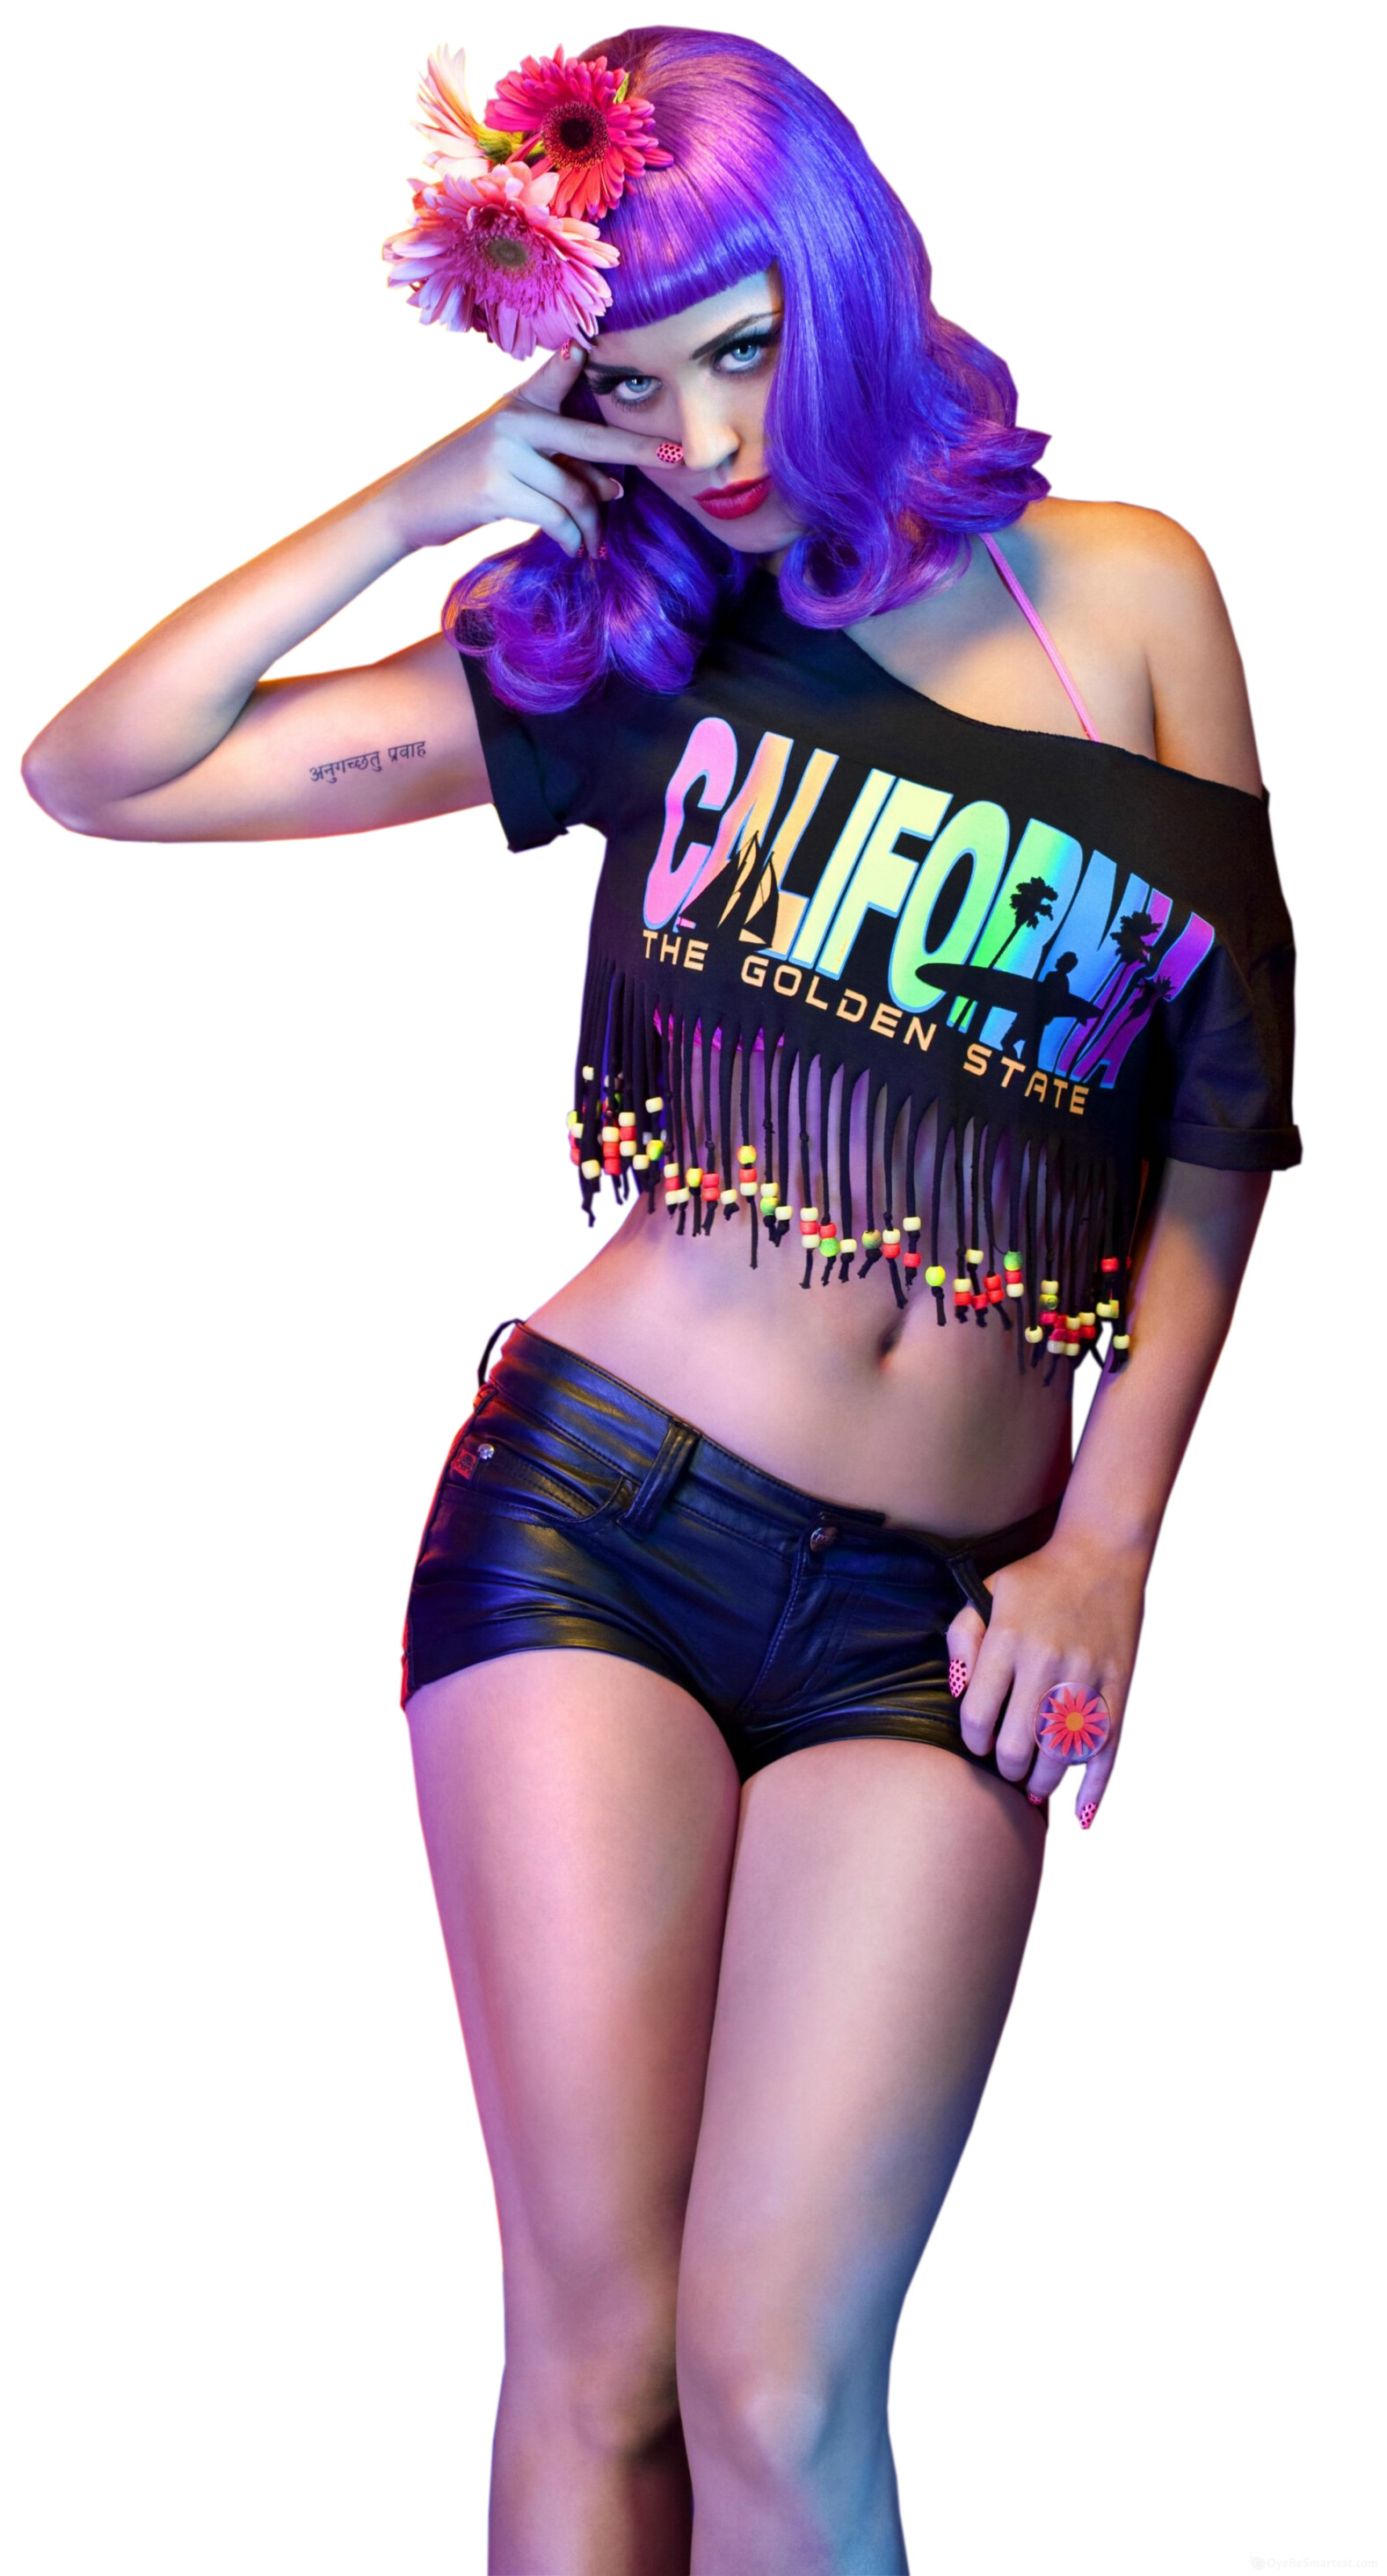 Katy Perry: "Firework" was released by Capitol Records on October 26, 2010. 1580x2940 HD Background.